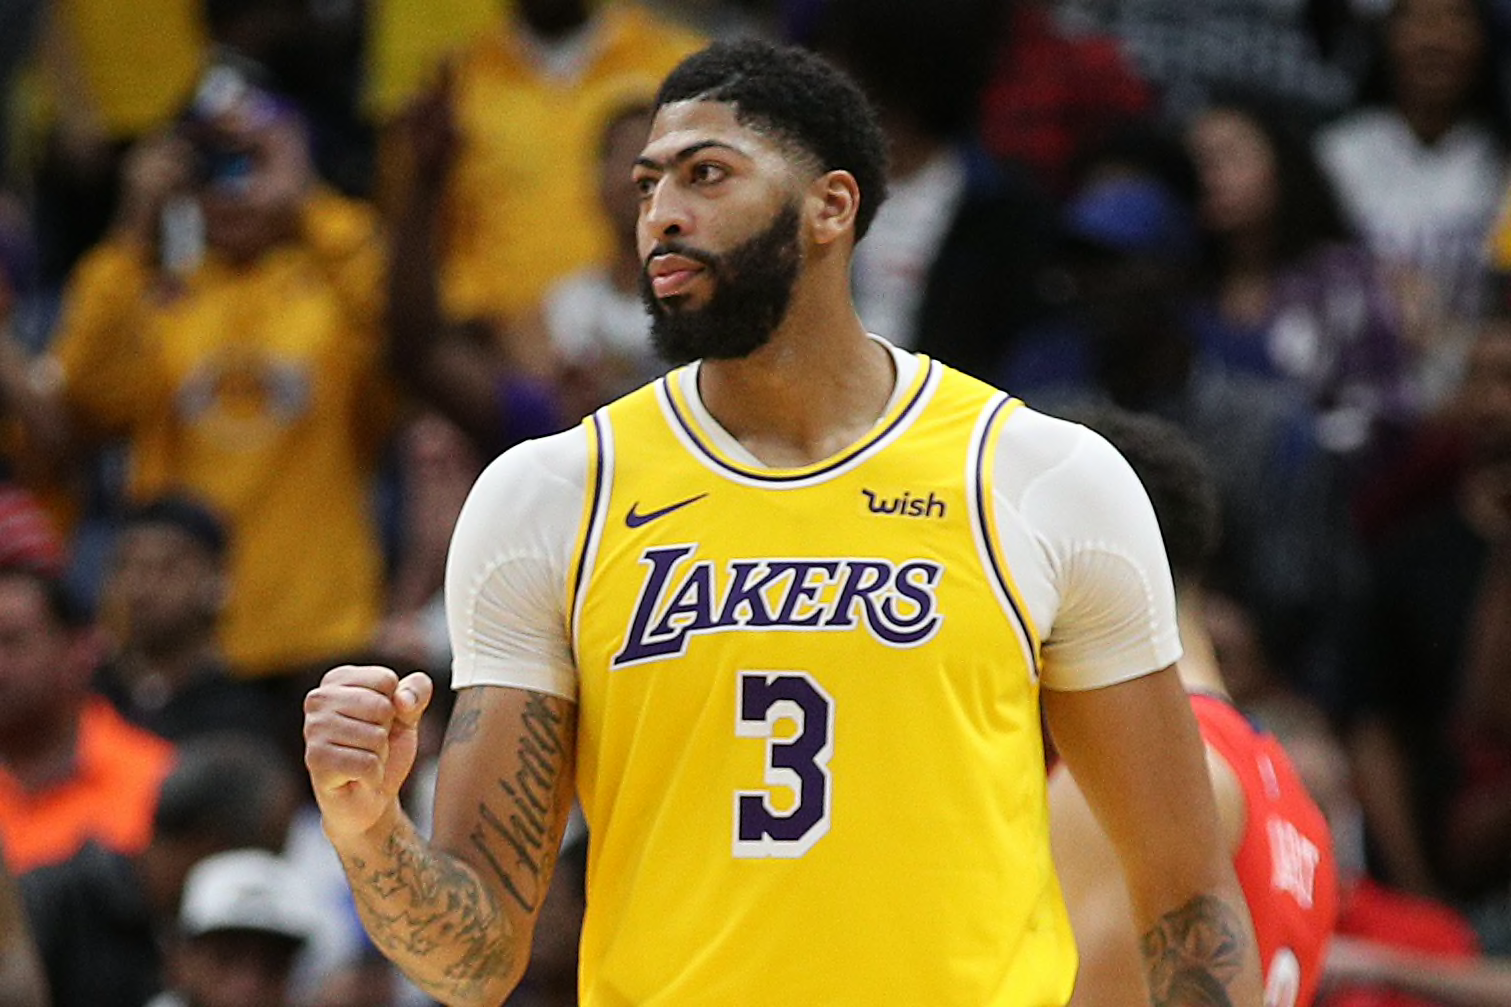  Anthony Davis Los Angeles Lakers #3 Youth 8-20 Yellow